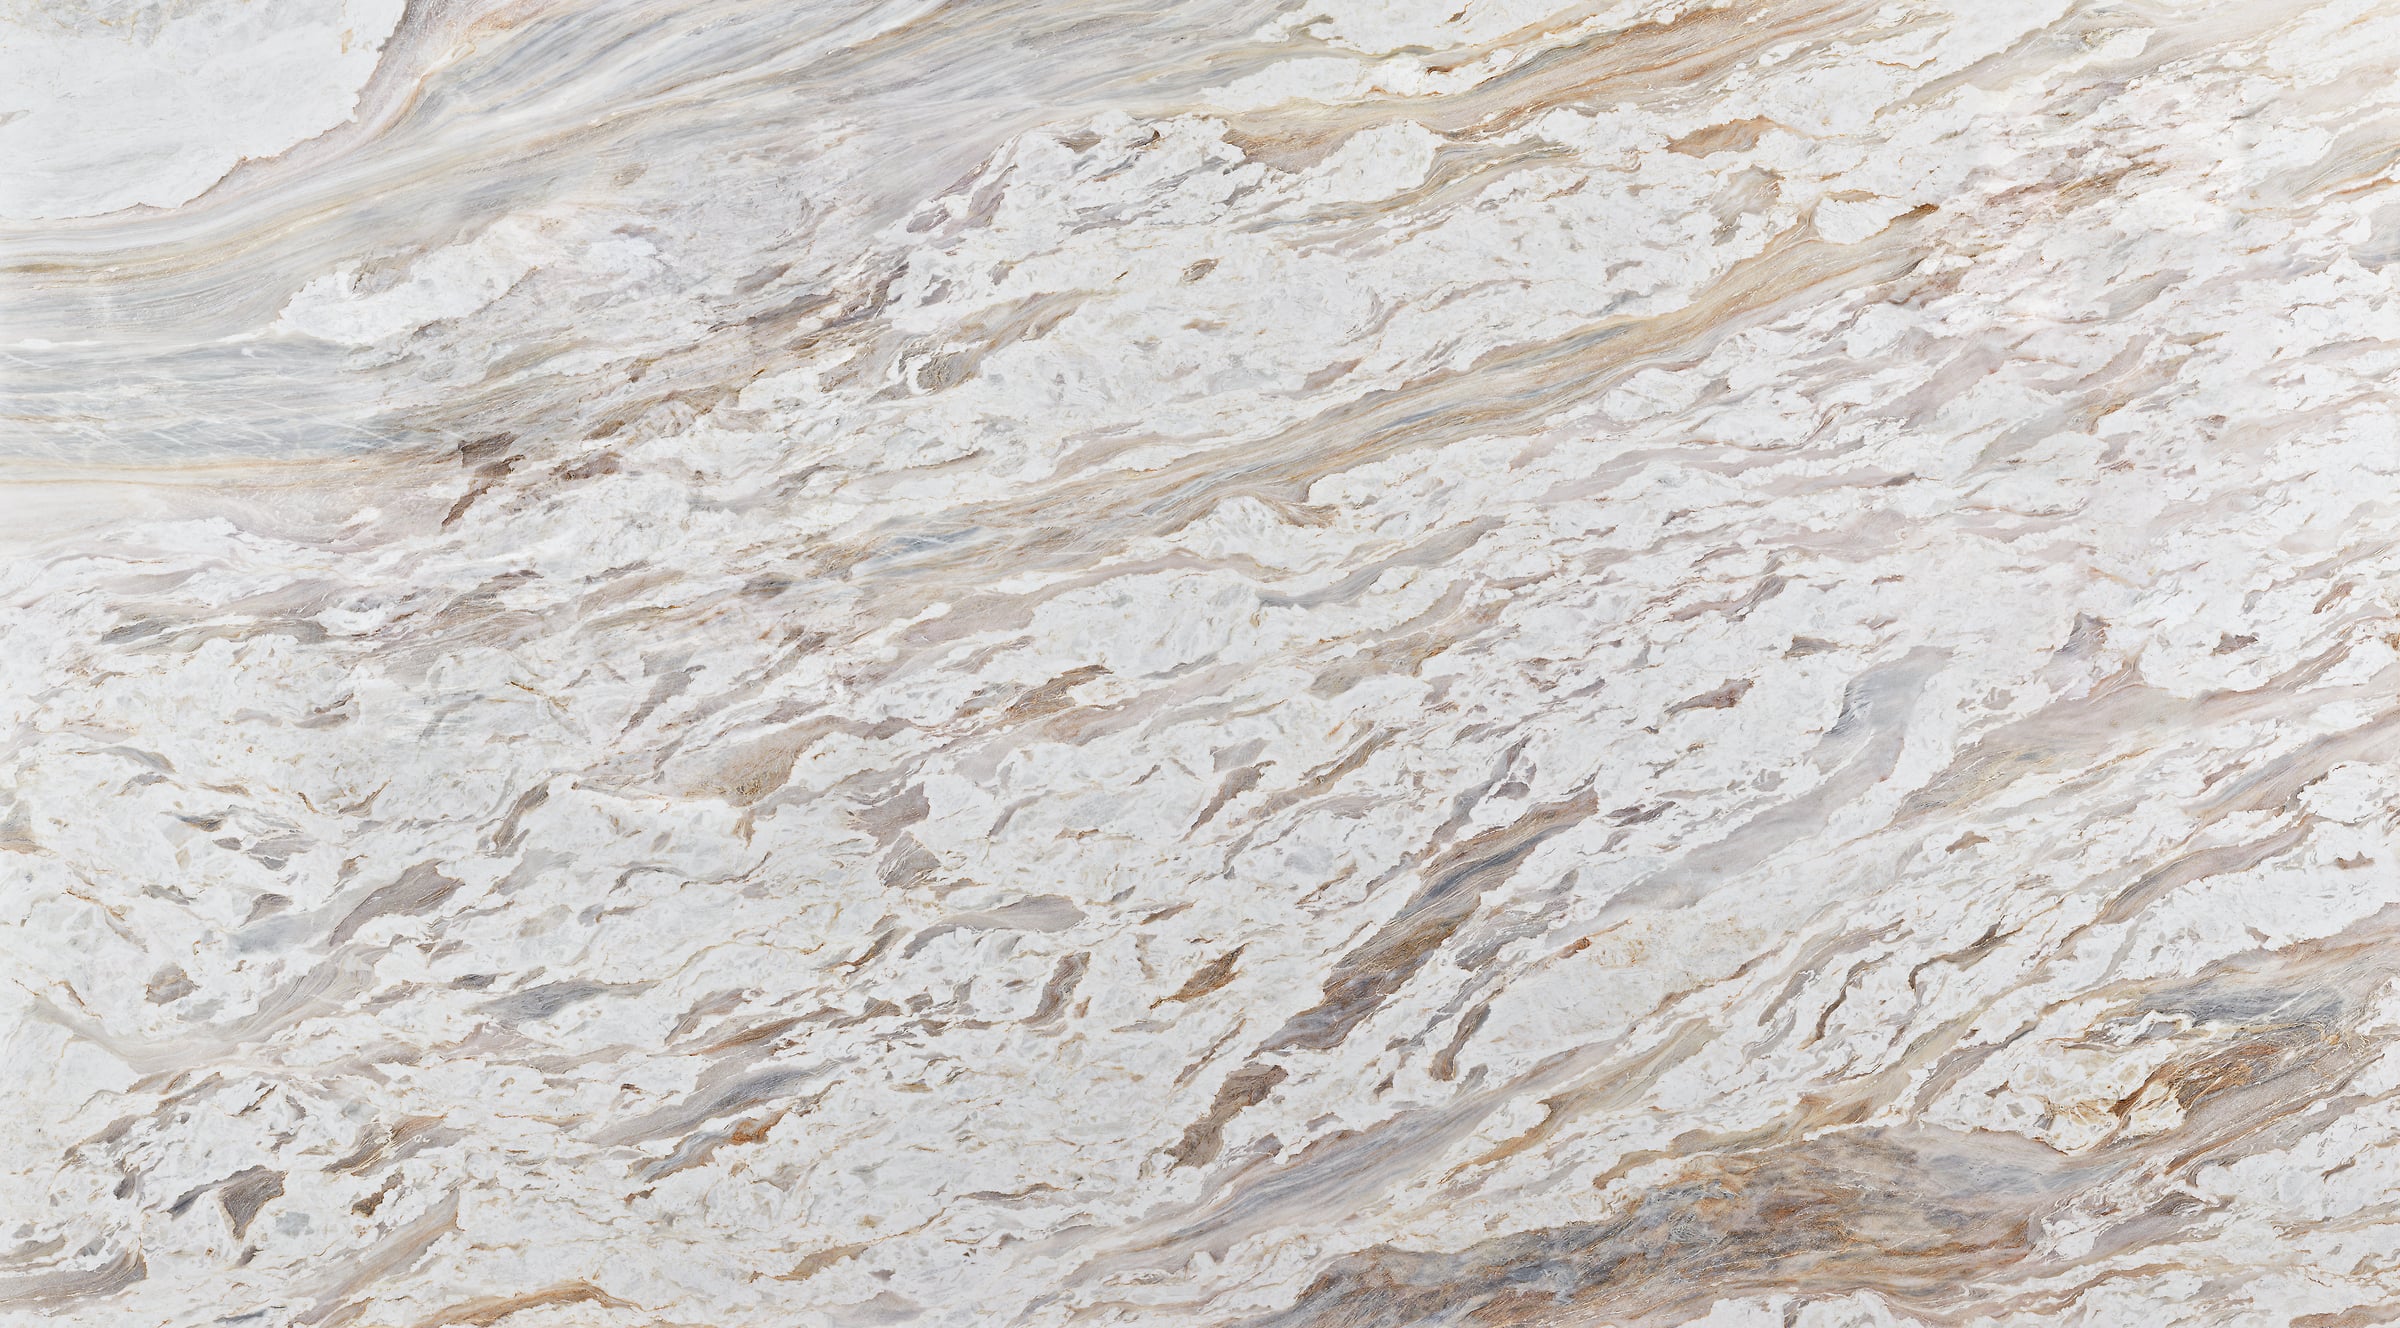 959 megapixels! An ultra-high-resolution texture photo file of egeo ondulato marble stone; gigapixel photograph created by David Lineton.